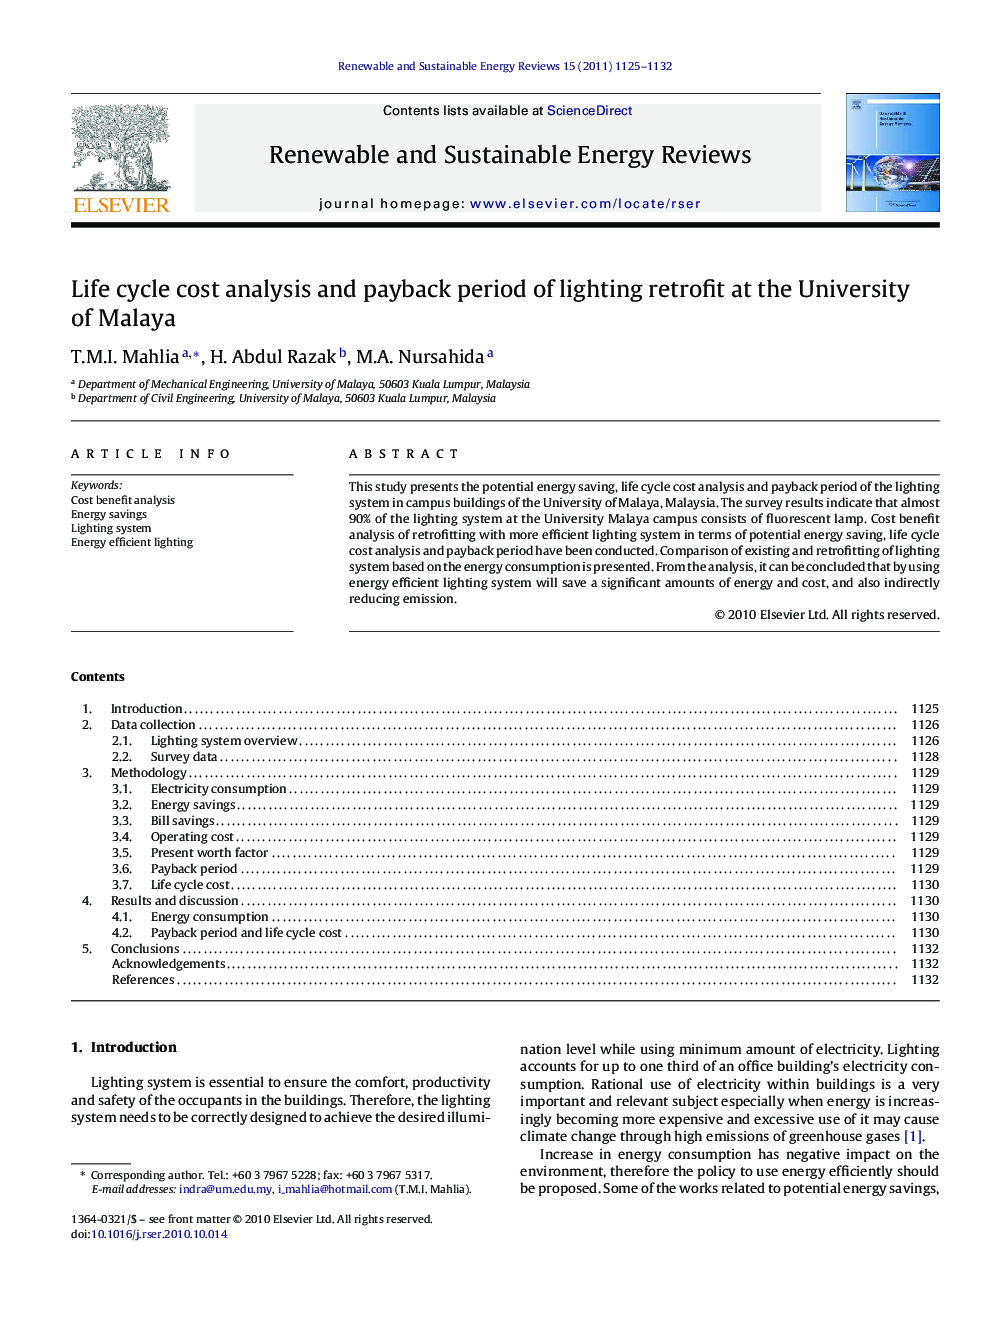 Life cycle cost analysis and payback period of lighting retrofit at the University of Malaya